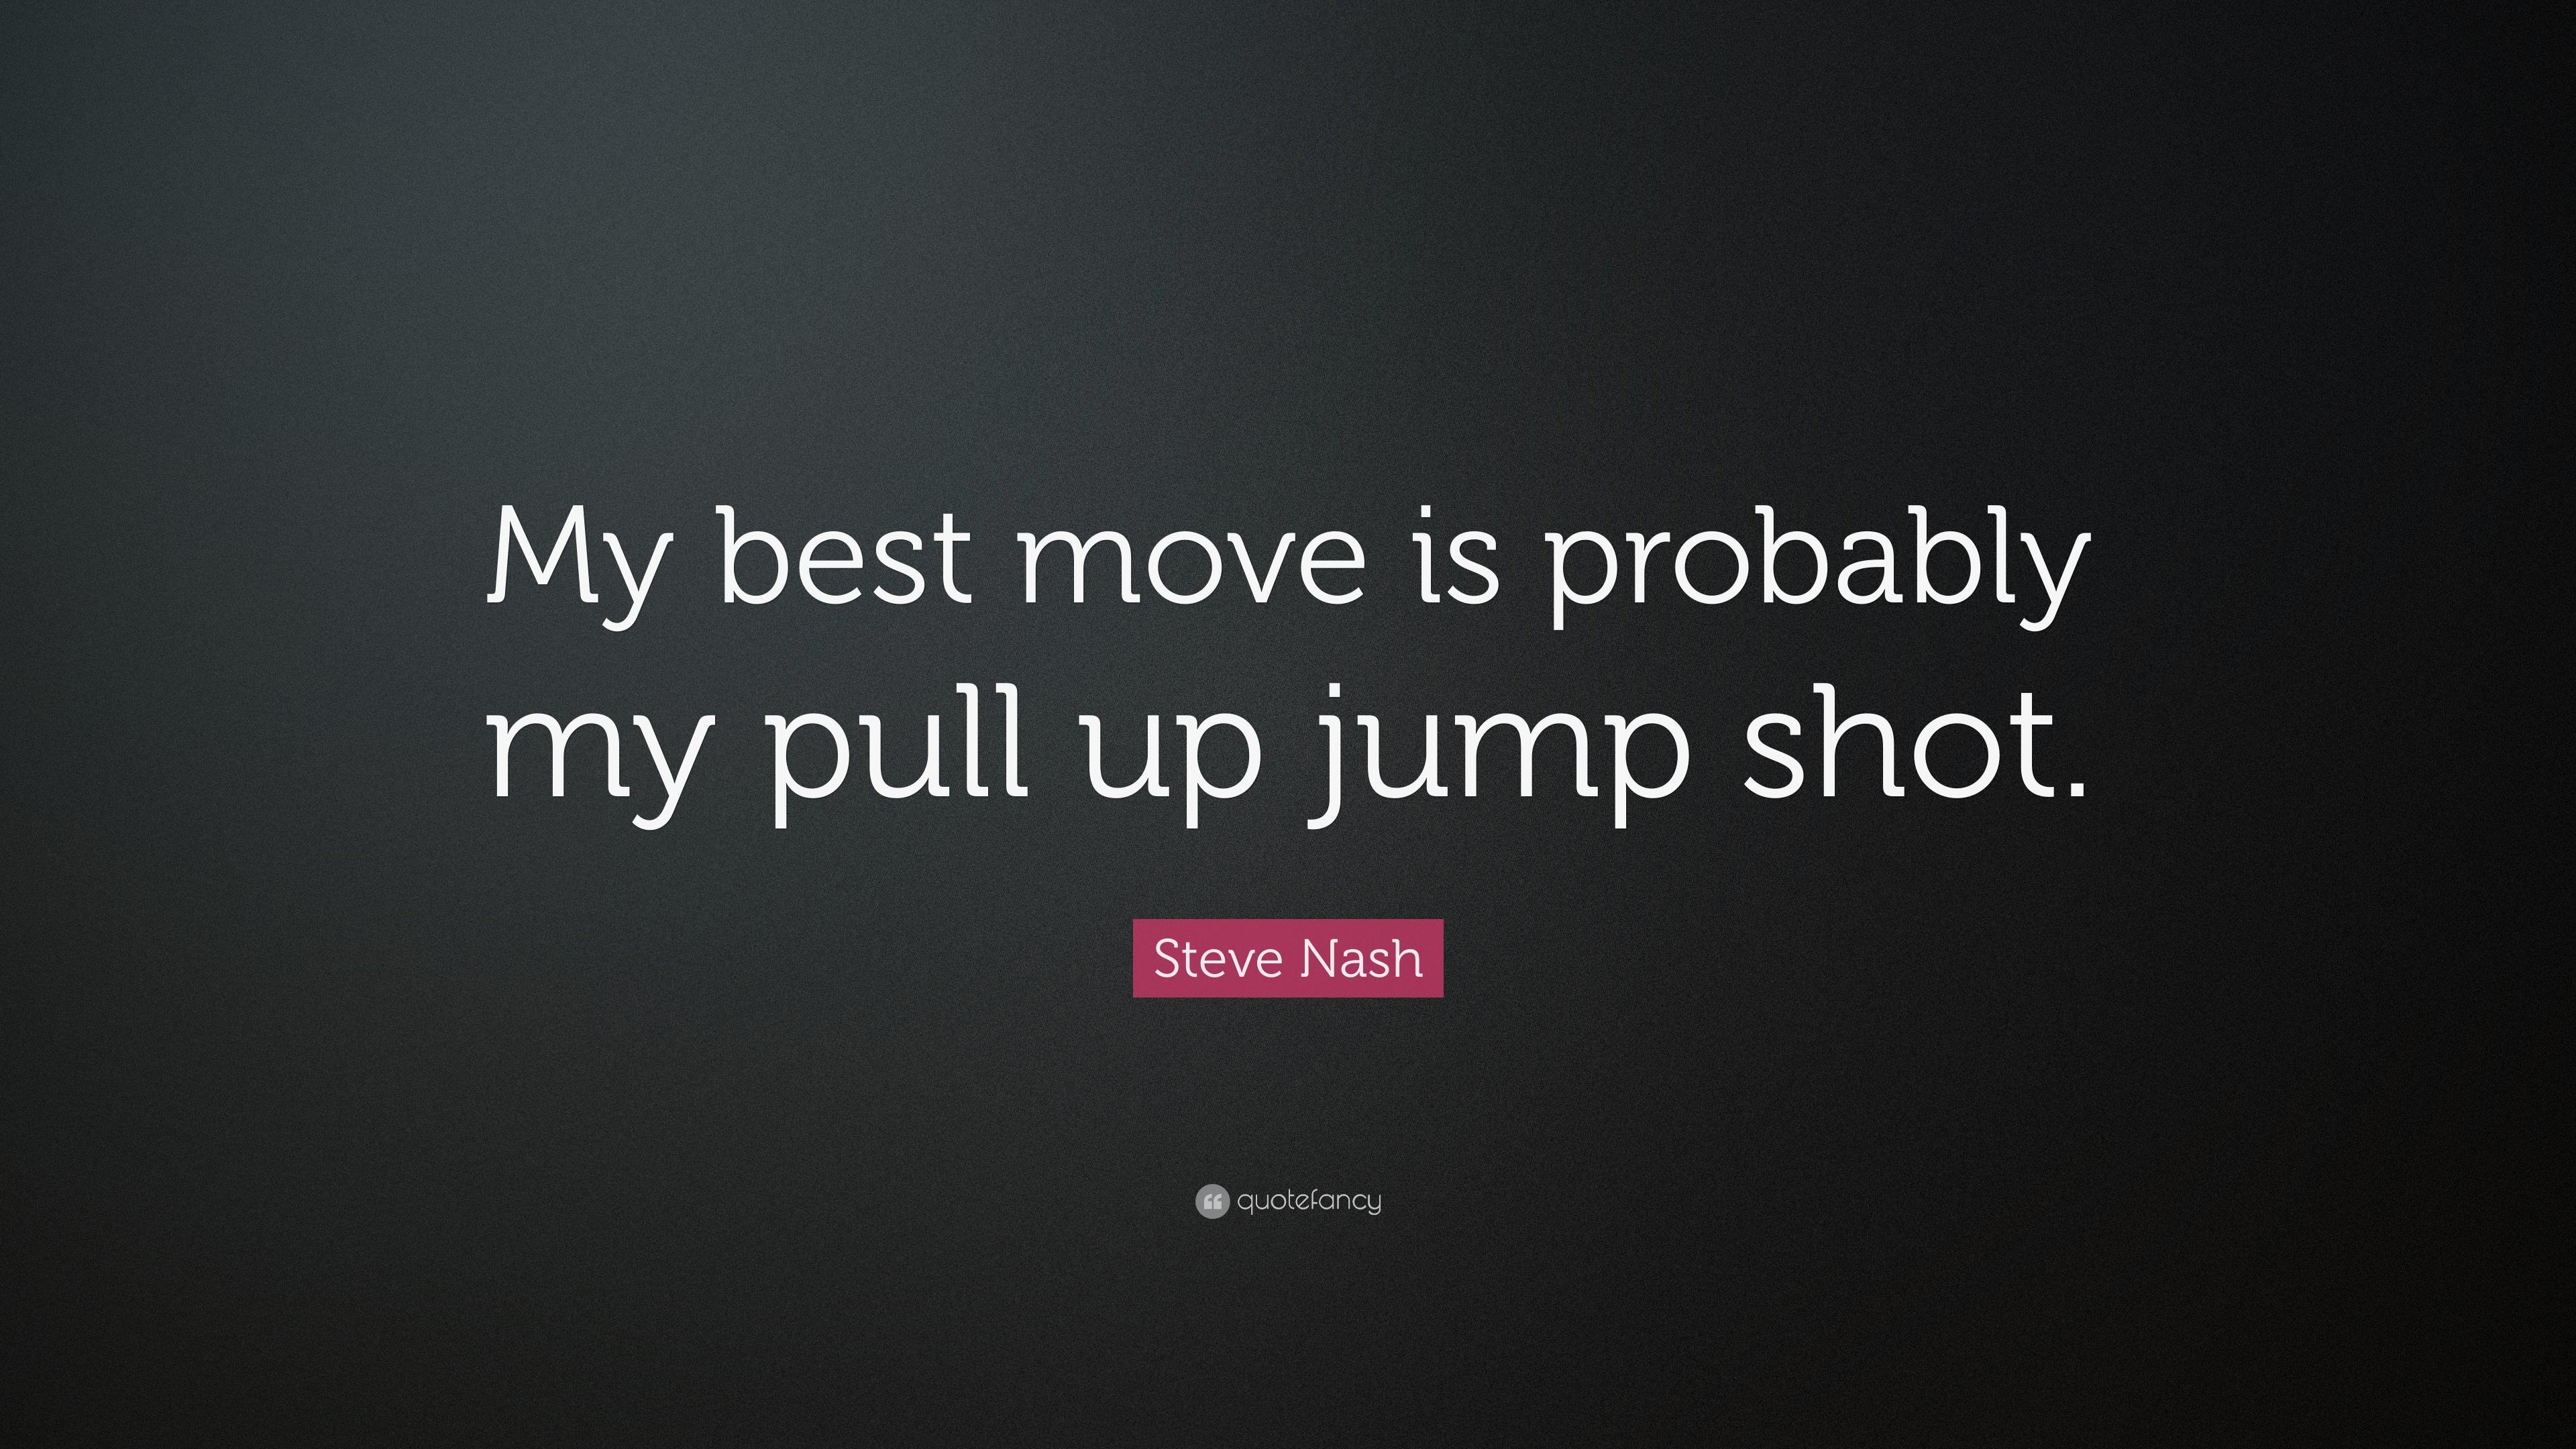 Steve Nash Quote: “My best move is probably my pull up jump shot